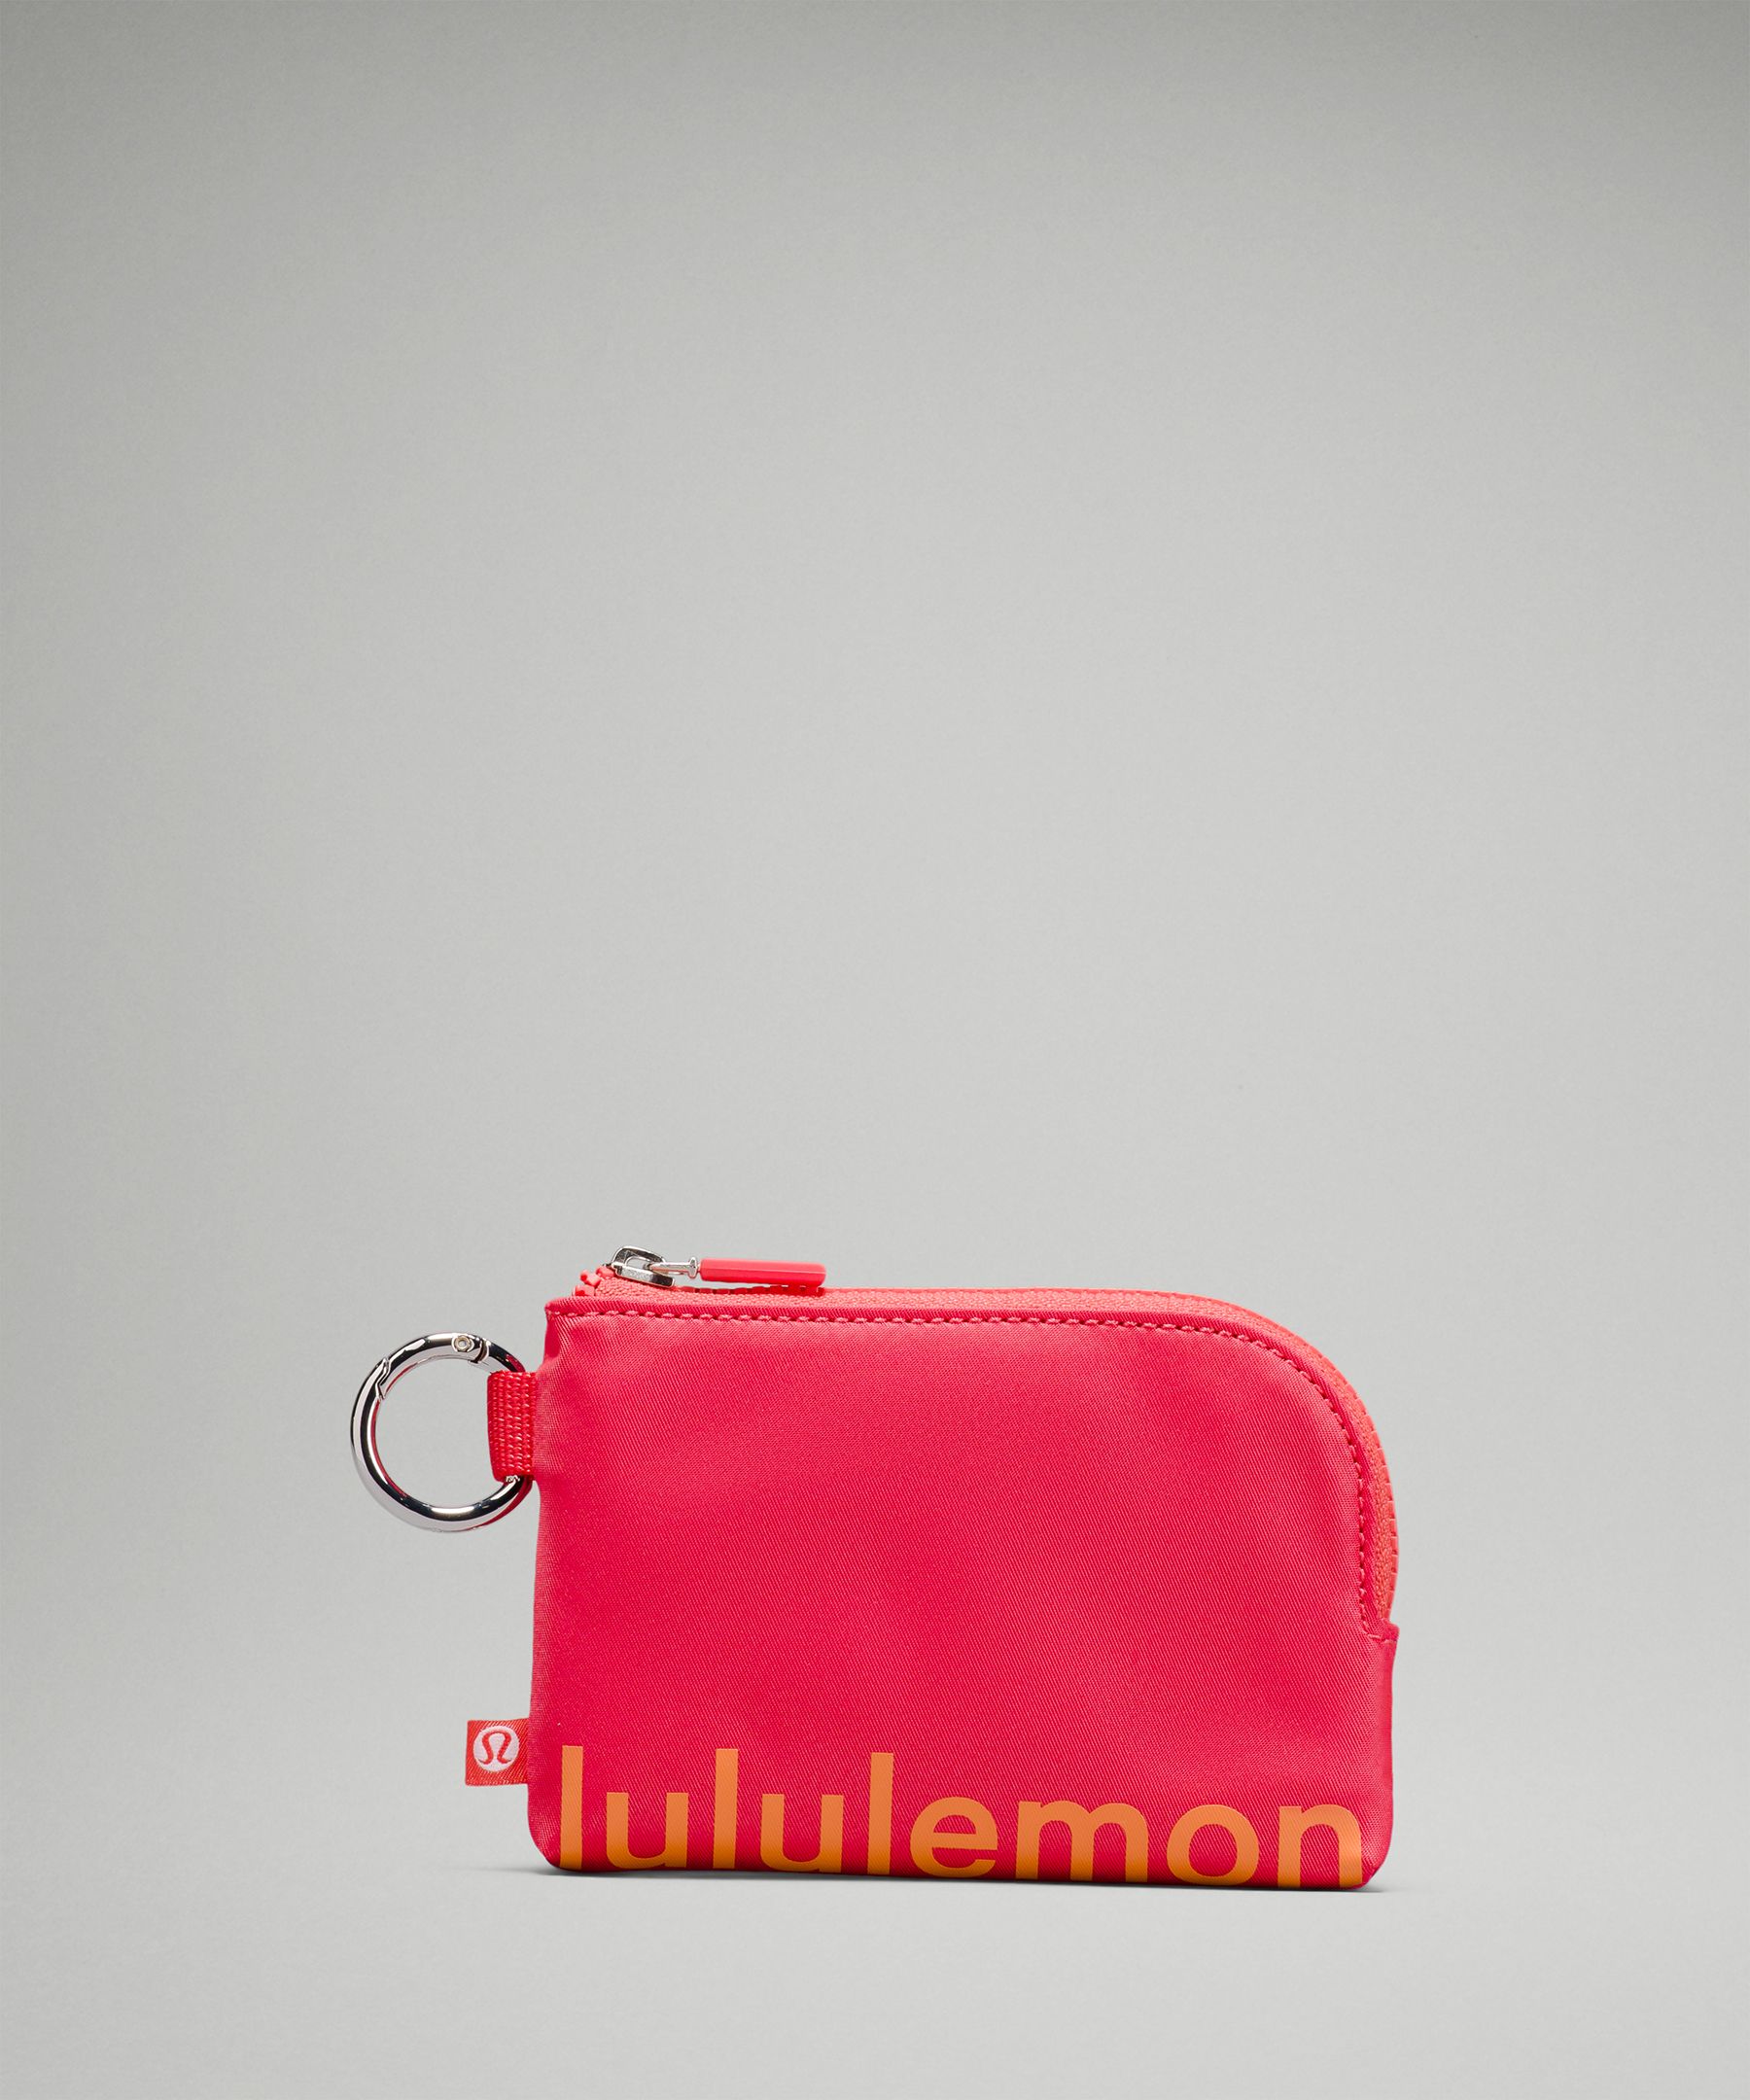 Lululemon Clippable Card Pouch In Pale Raspberry